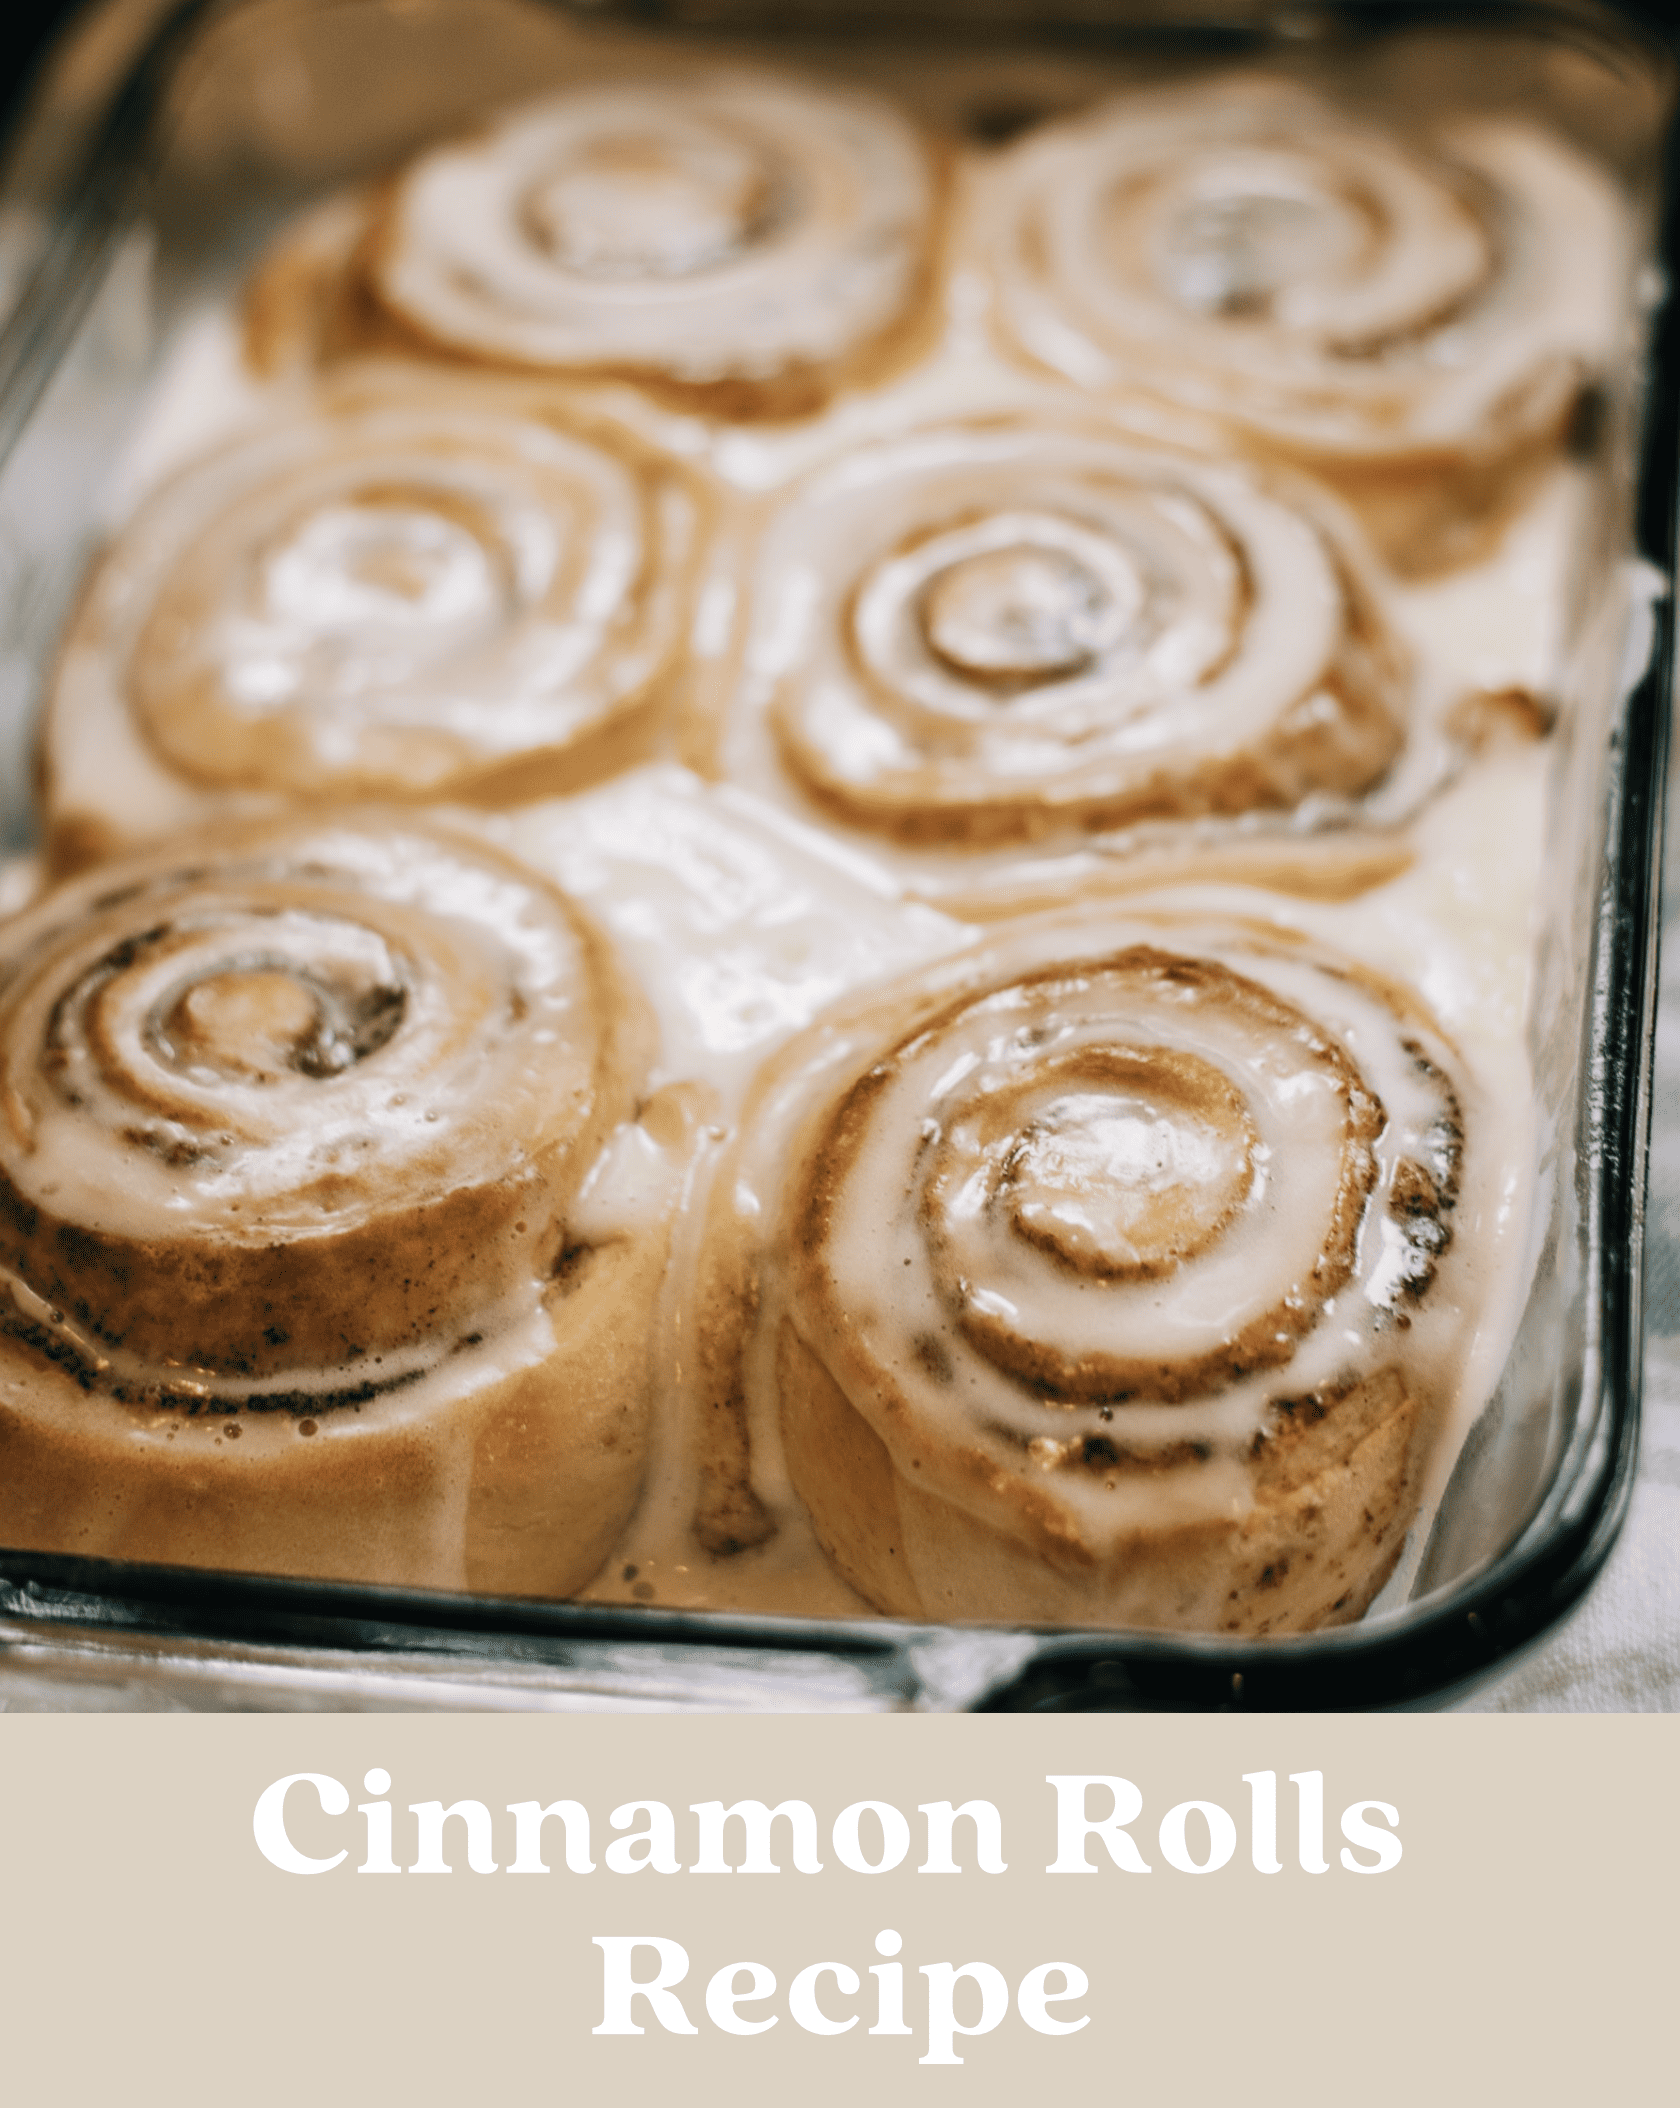 Our Traditional Cinnamon Rolls Recipe